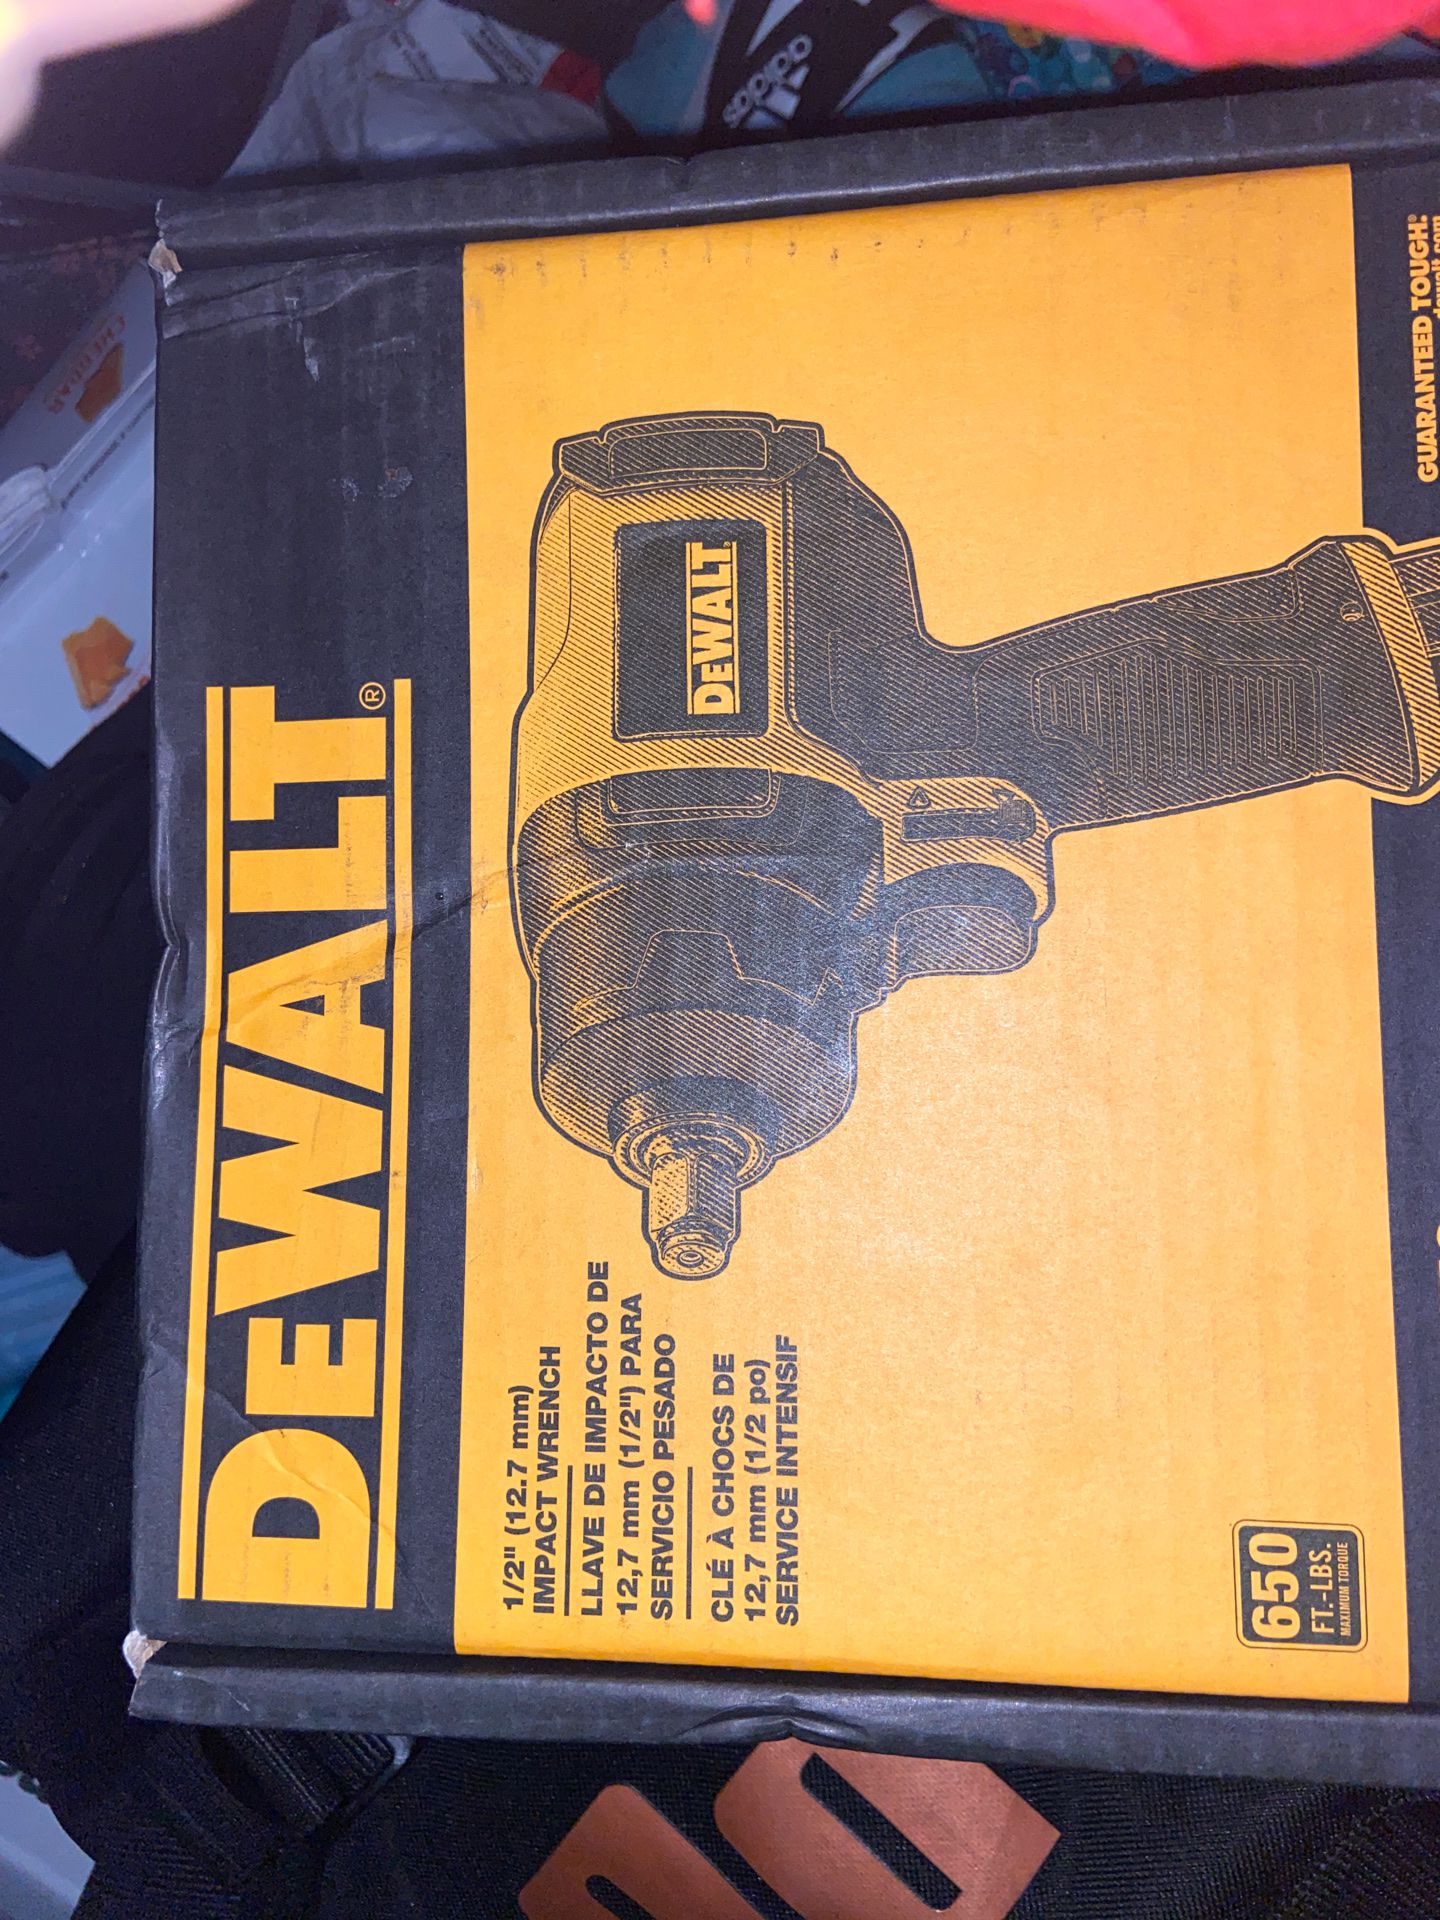 Dewal1/2” 12.7 mm impact wrench DWMT70773 650Ft -LBS brand new 199.99 retail